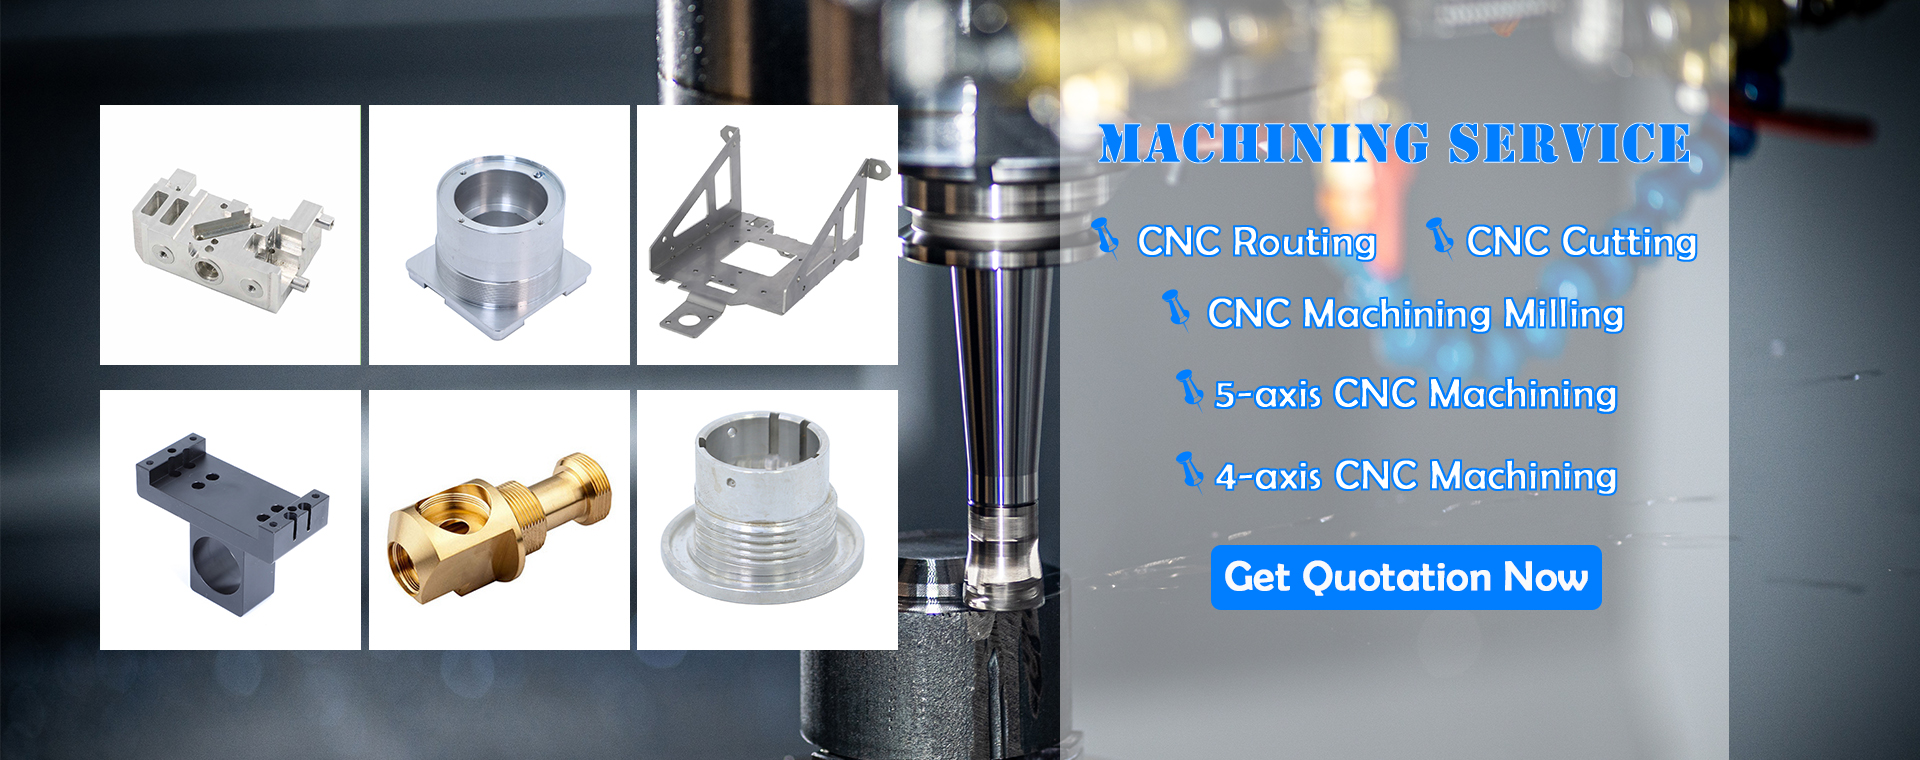 Find Professional CNC Machining CNC Milling CNC Cutting CNC Routing CNC Milling Metal Stamping Service From Marchton Automation